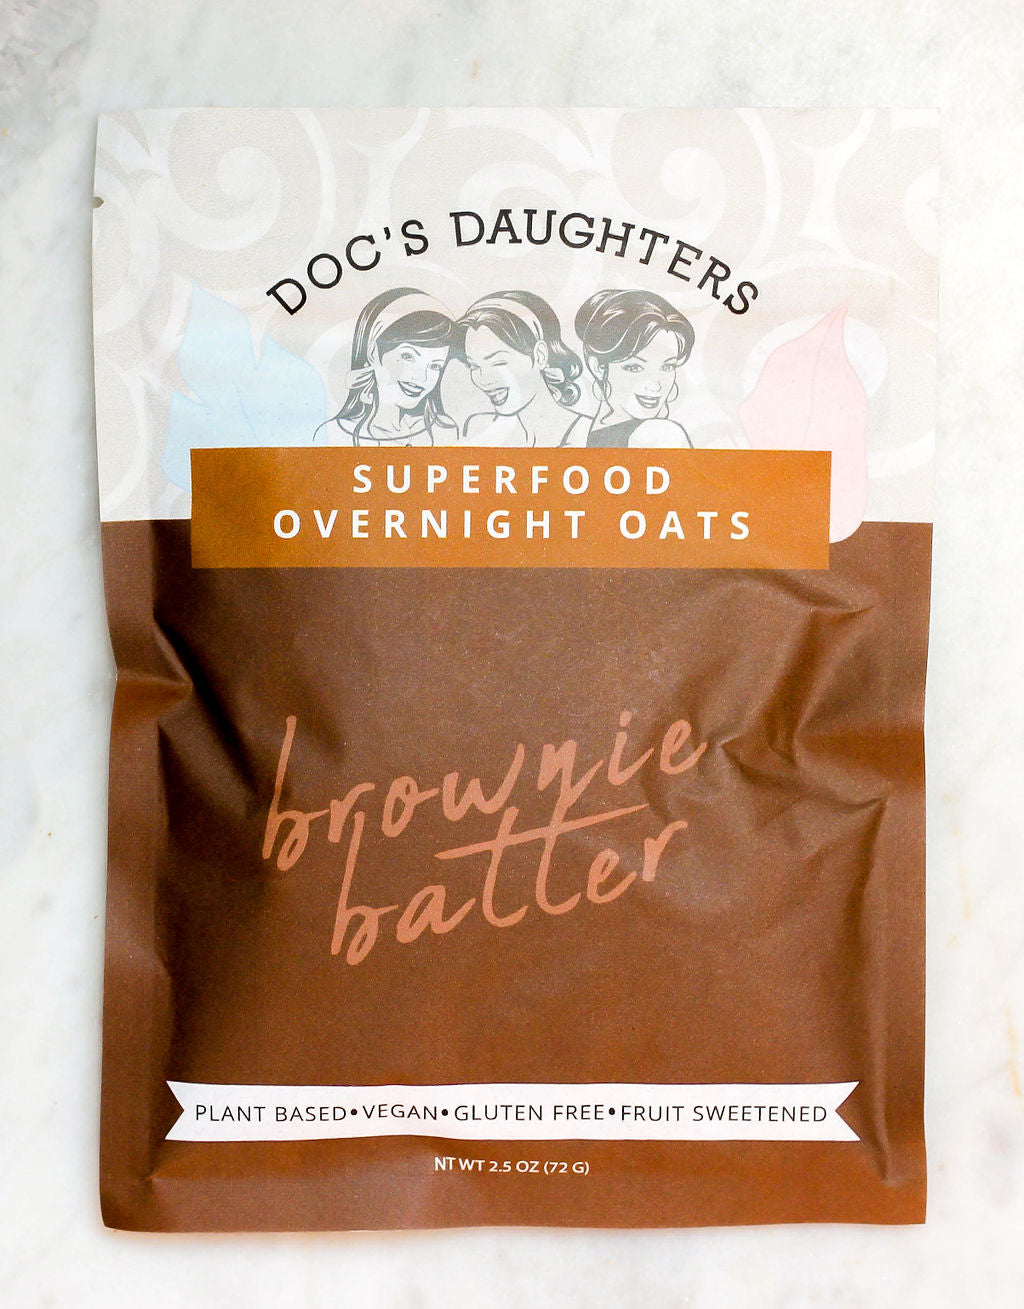 Brownie Batter Superfood Overnight Oats (6 or 12 bags)